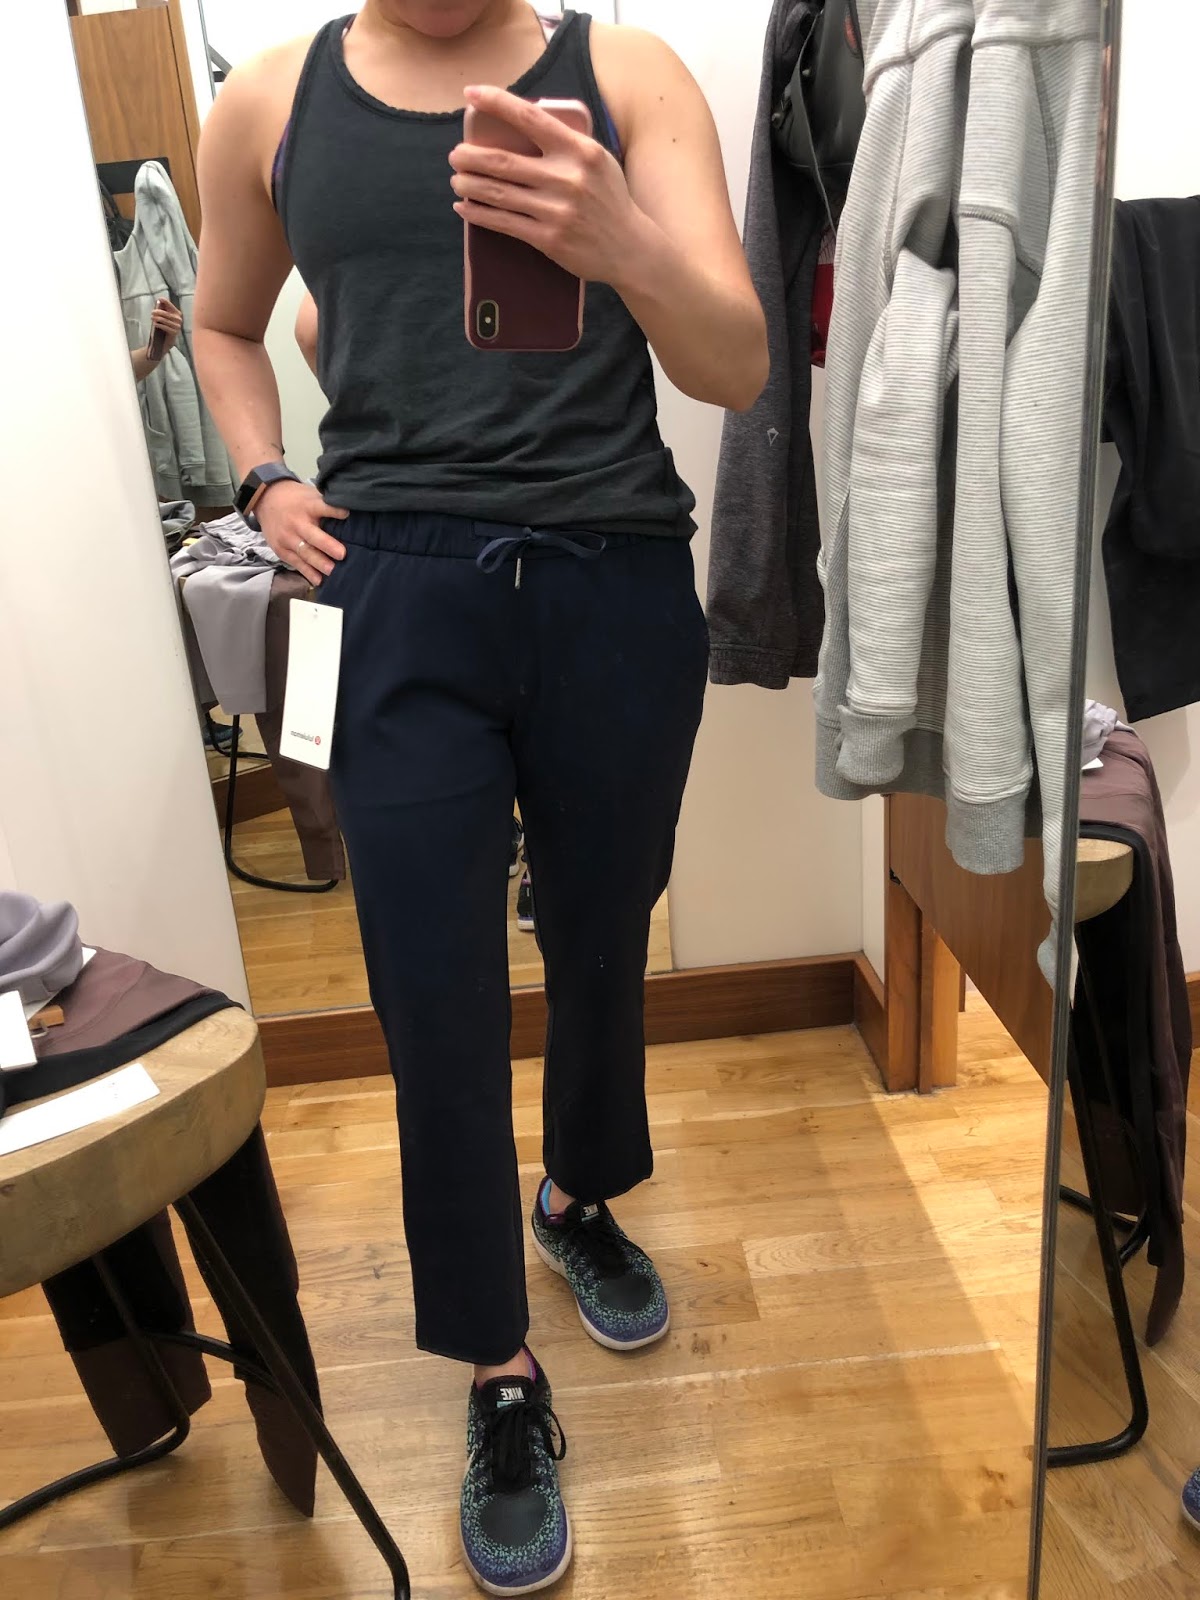 lululemon on the fly pant crop